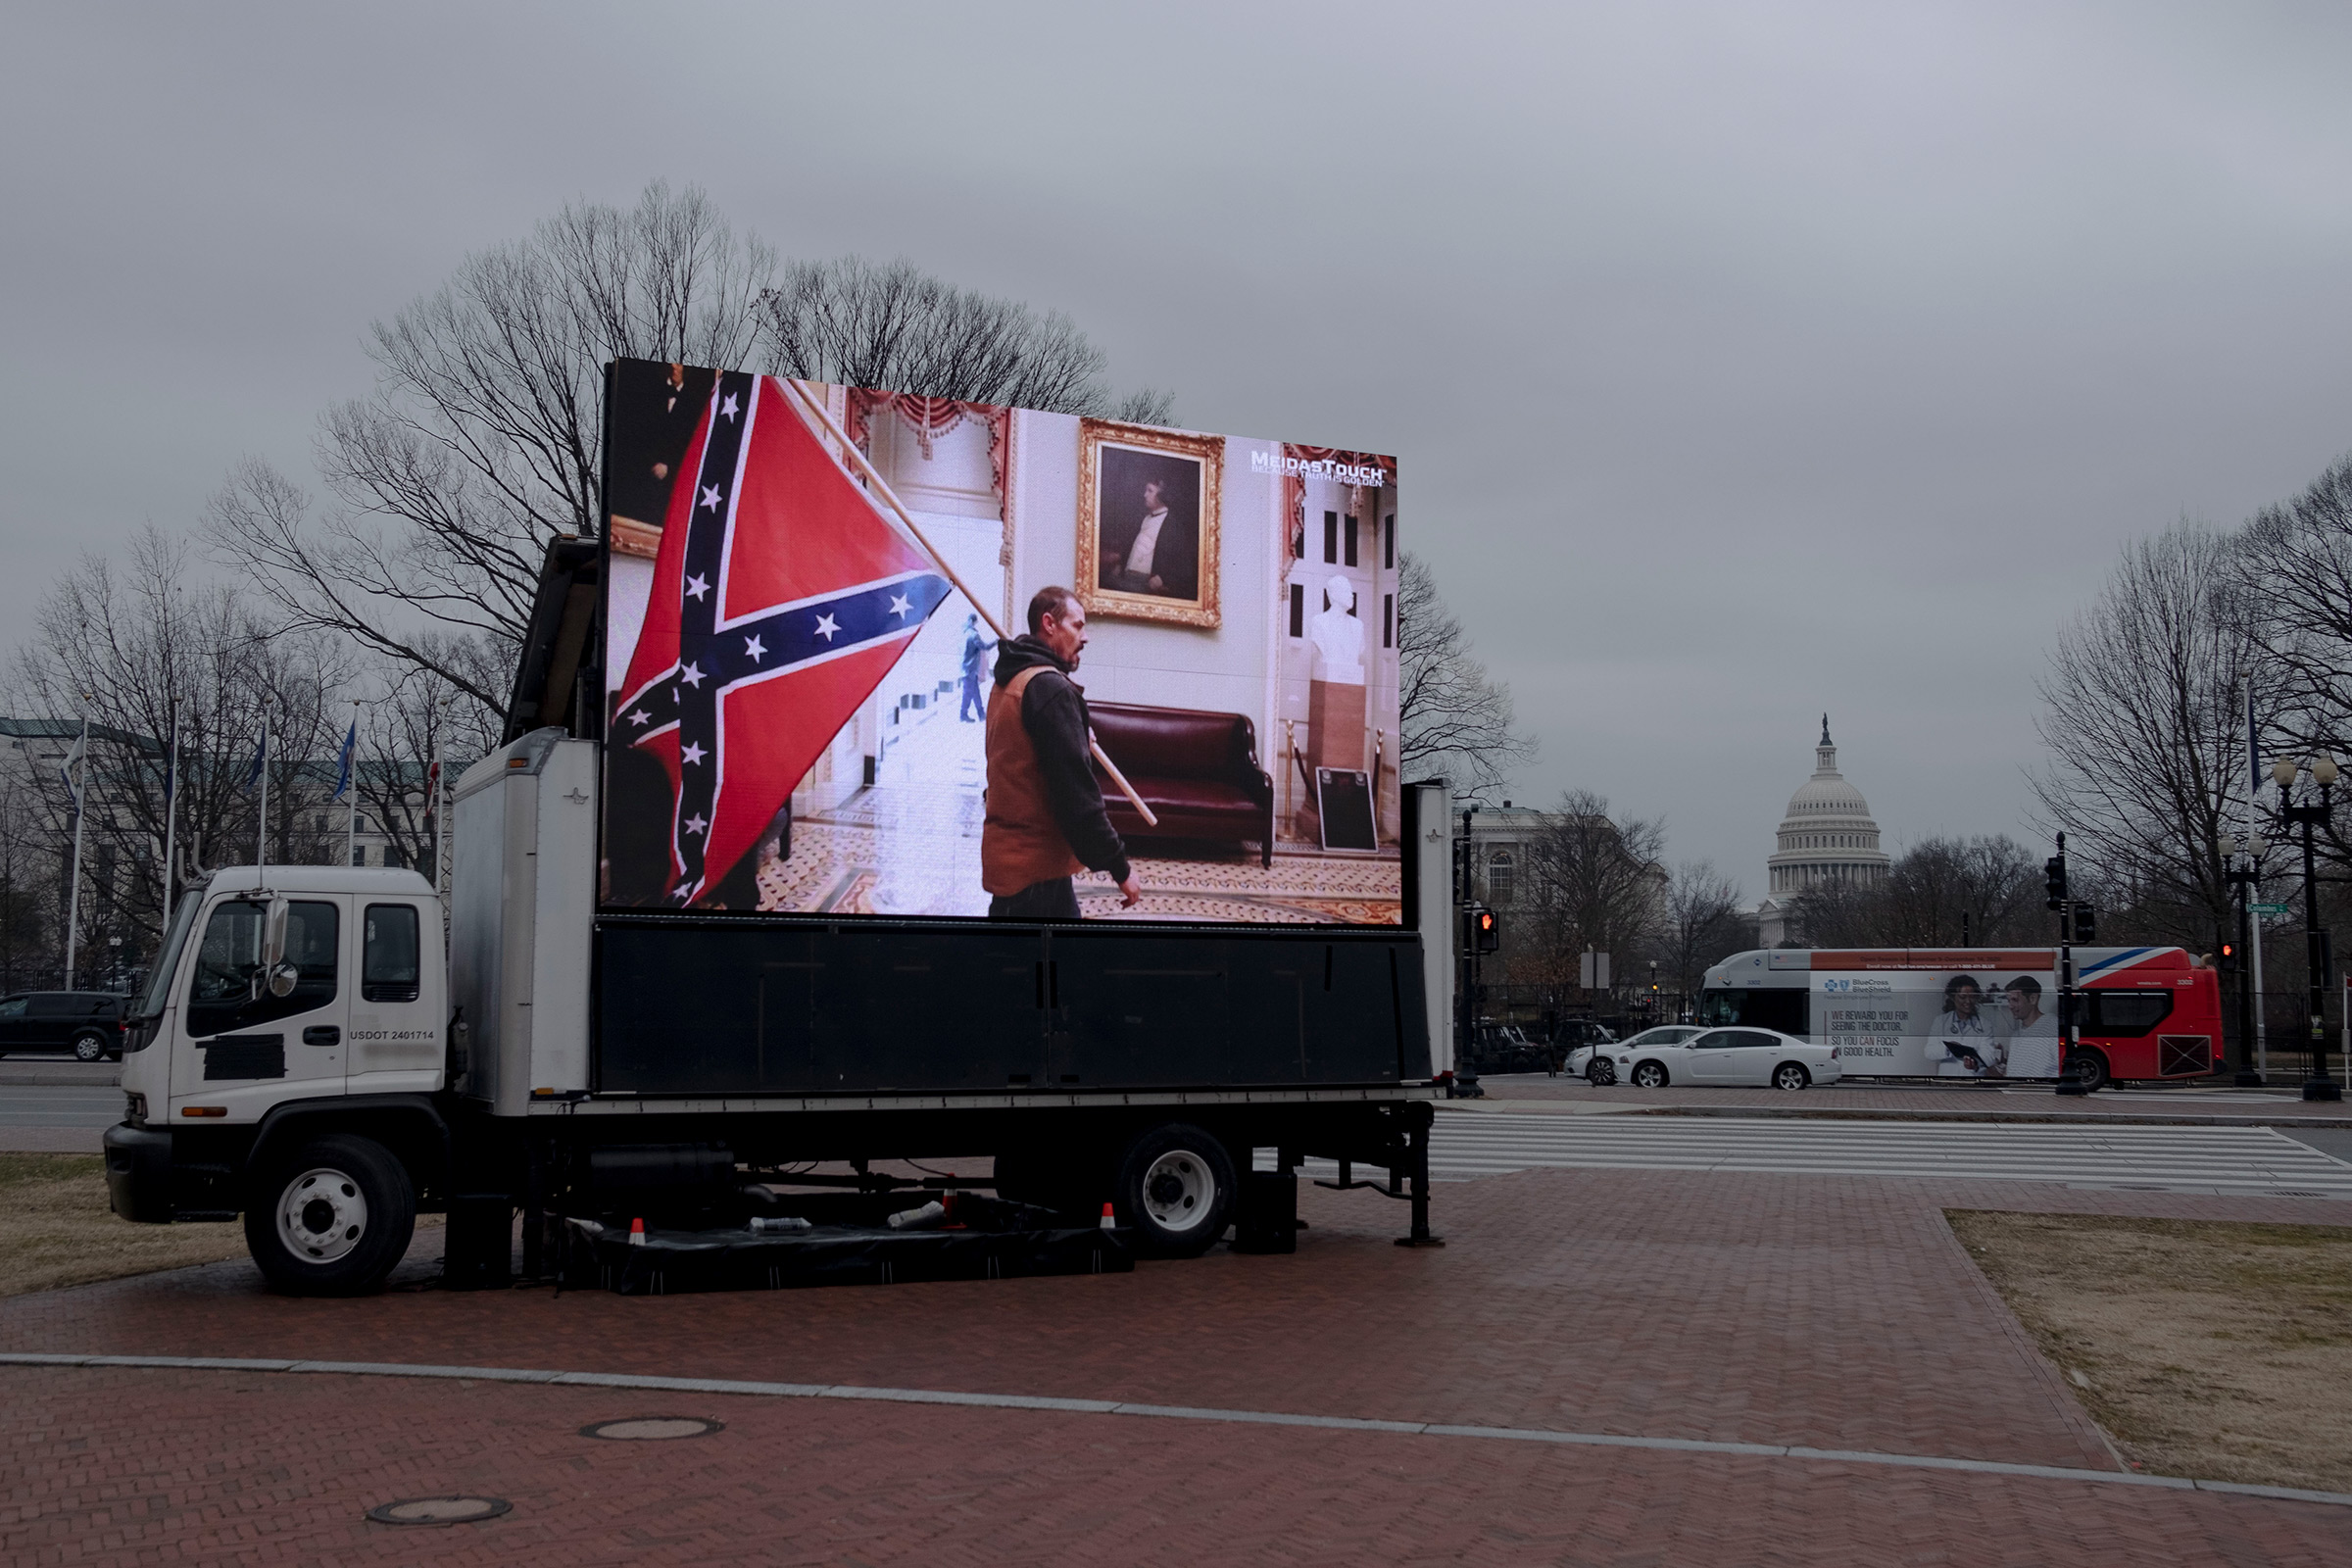 2/10/21, Washington, D.C. A truck showing scenes from the insurrection is parked outside Union Station during the impeachment trial of former president Donald Trump in Washington, D.C. on Feb. 10, 2021. Gabriella Demczuk / TIME